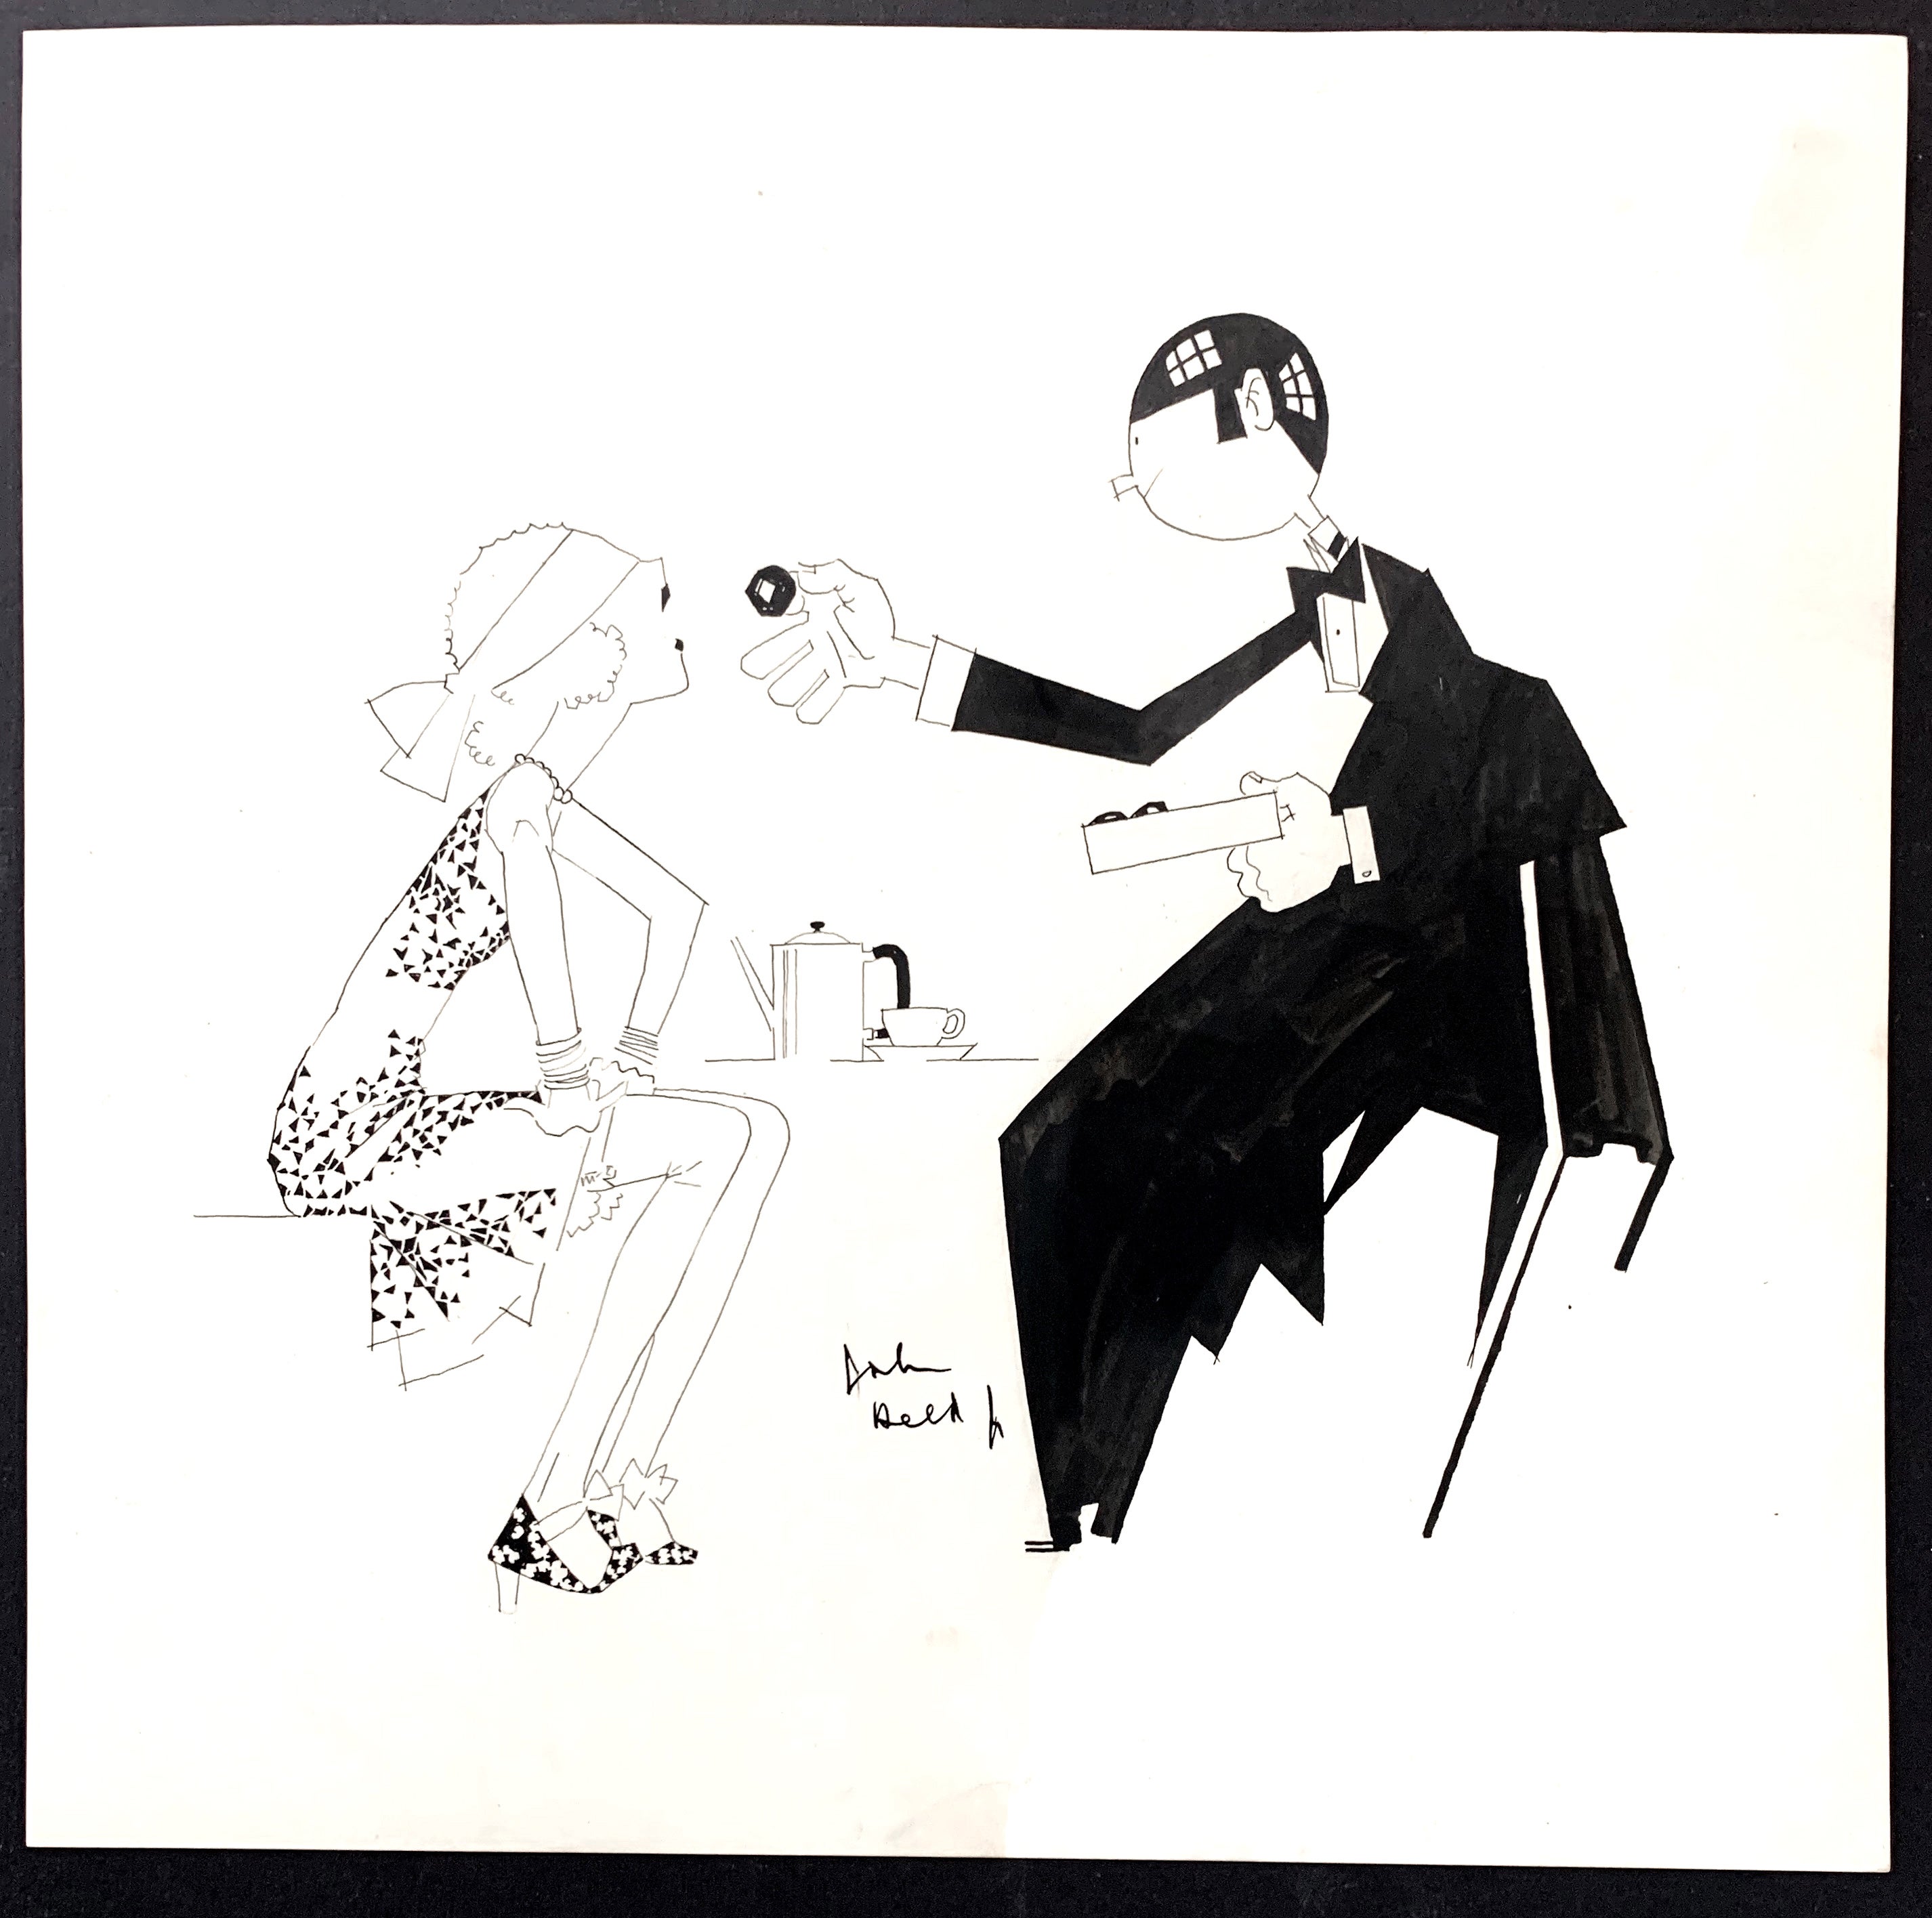 "Sampling Chocolates, " Quintessential Art Deco Drawing with Blindfolded Flapper